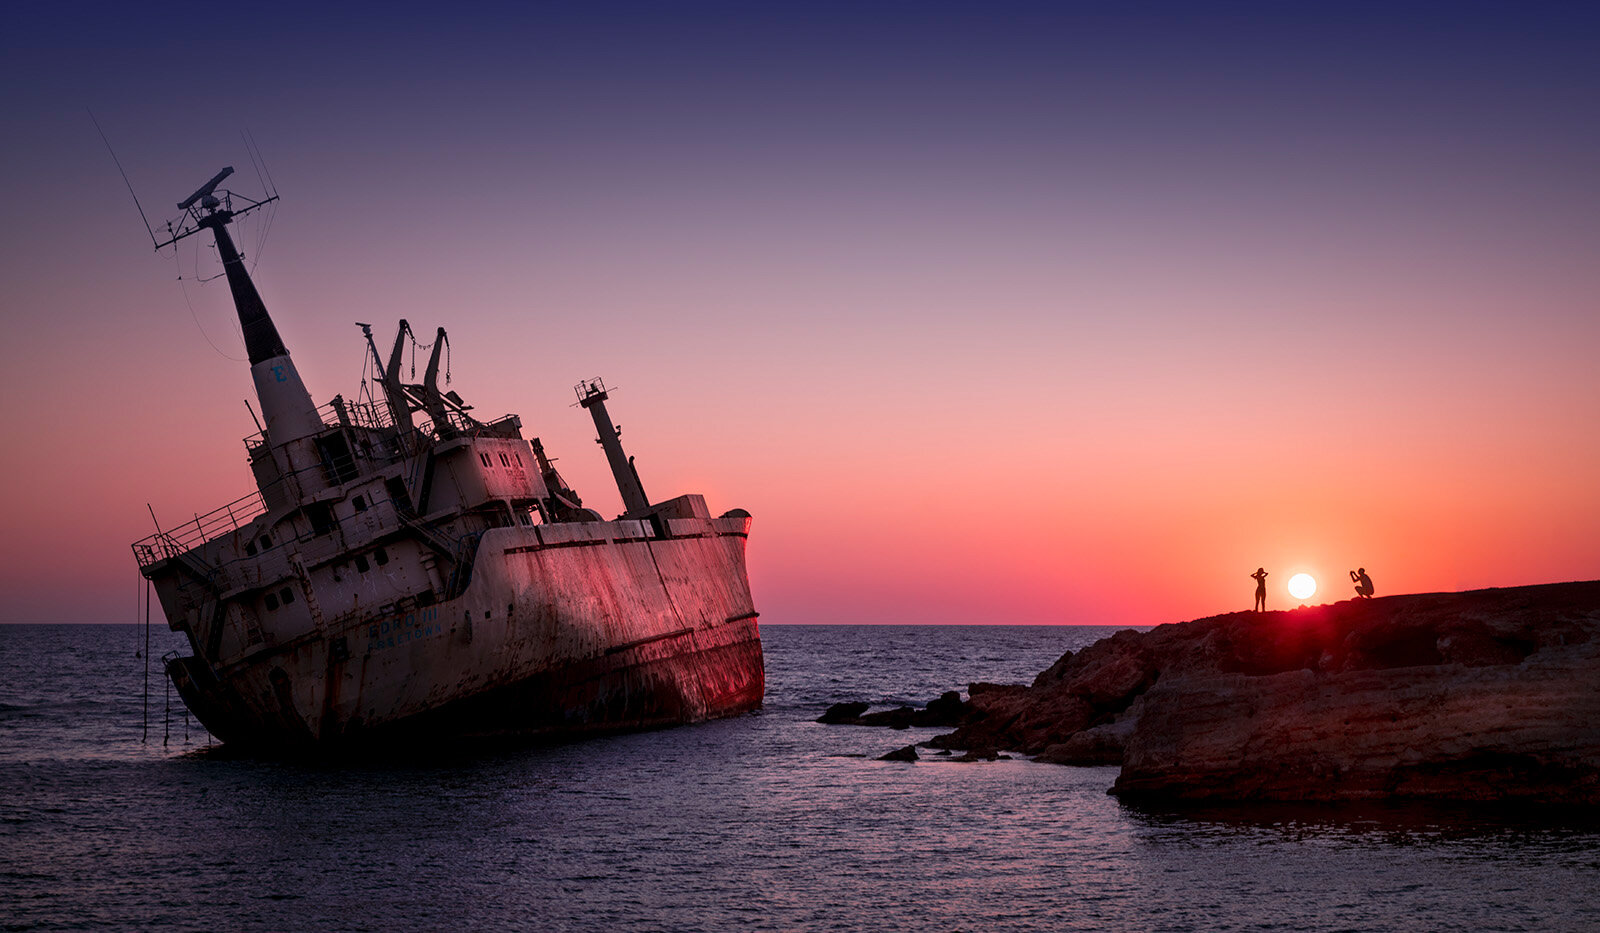 SUNSET AT THE SHIPWRECK